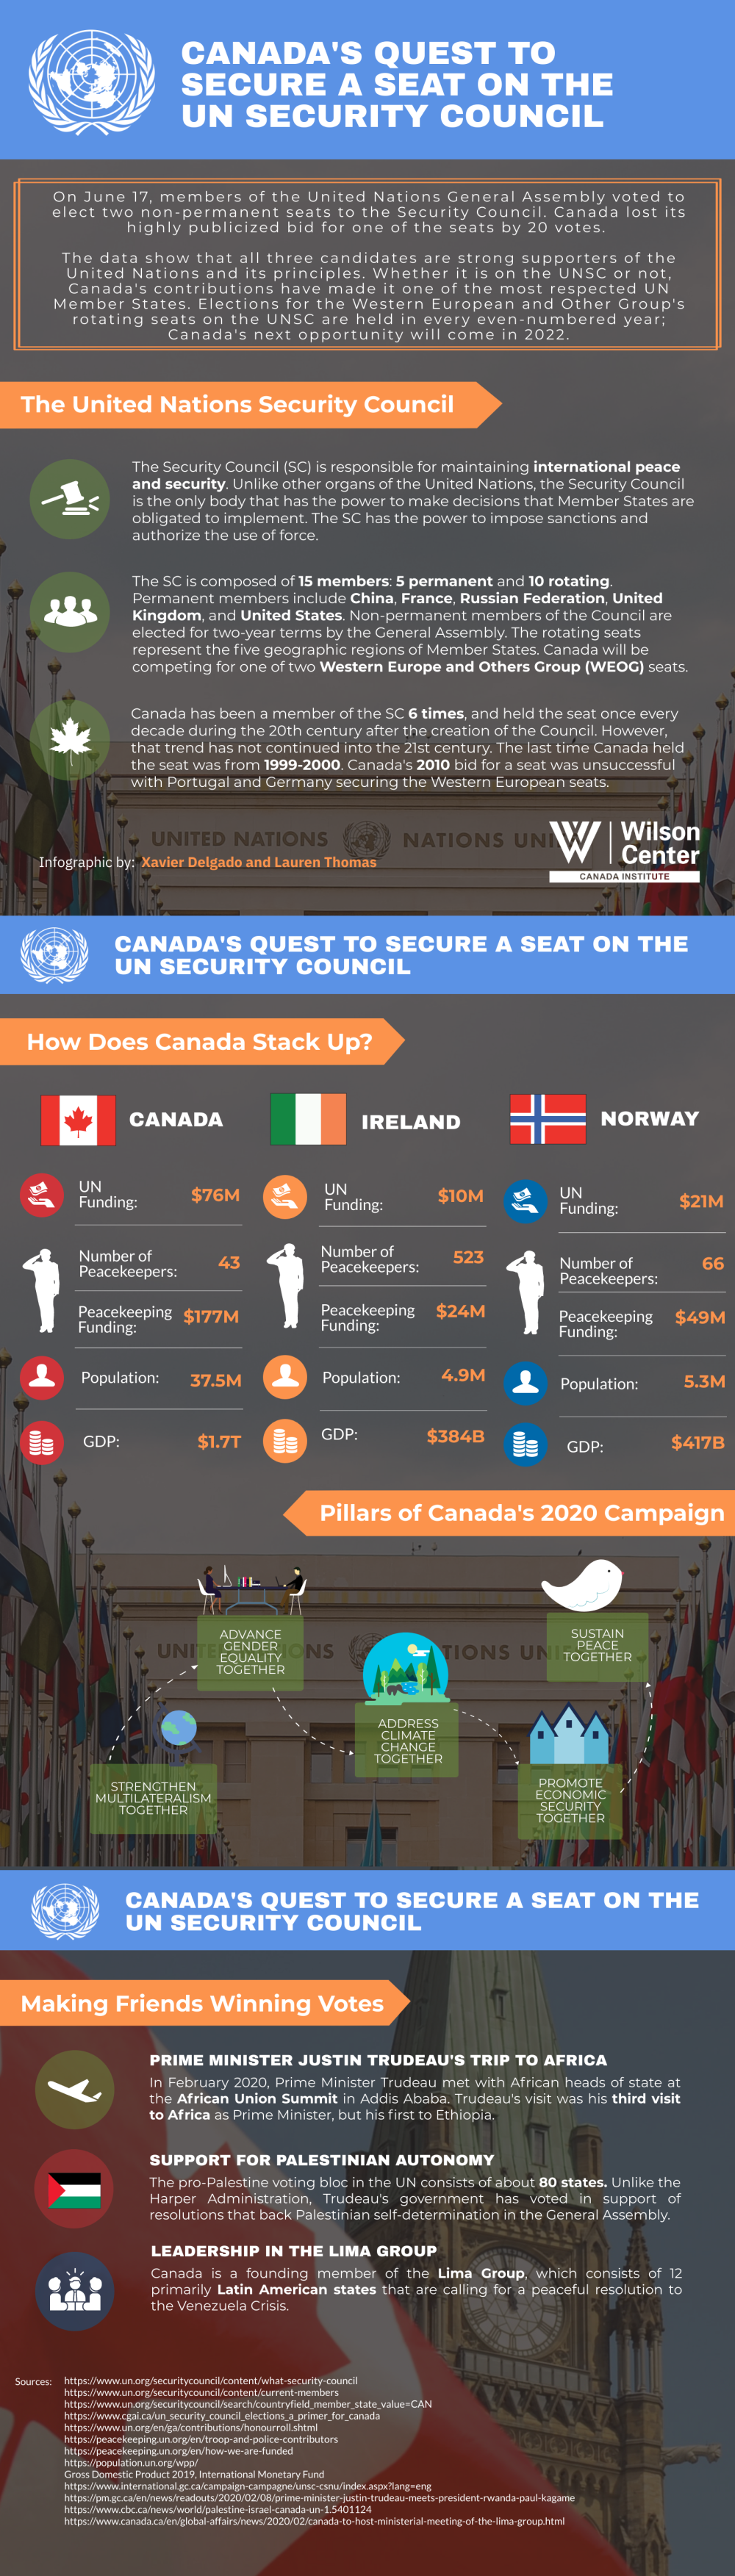 Infographic | Canada's Quest To Secure a Seat on the UN Security Council